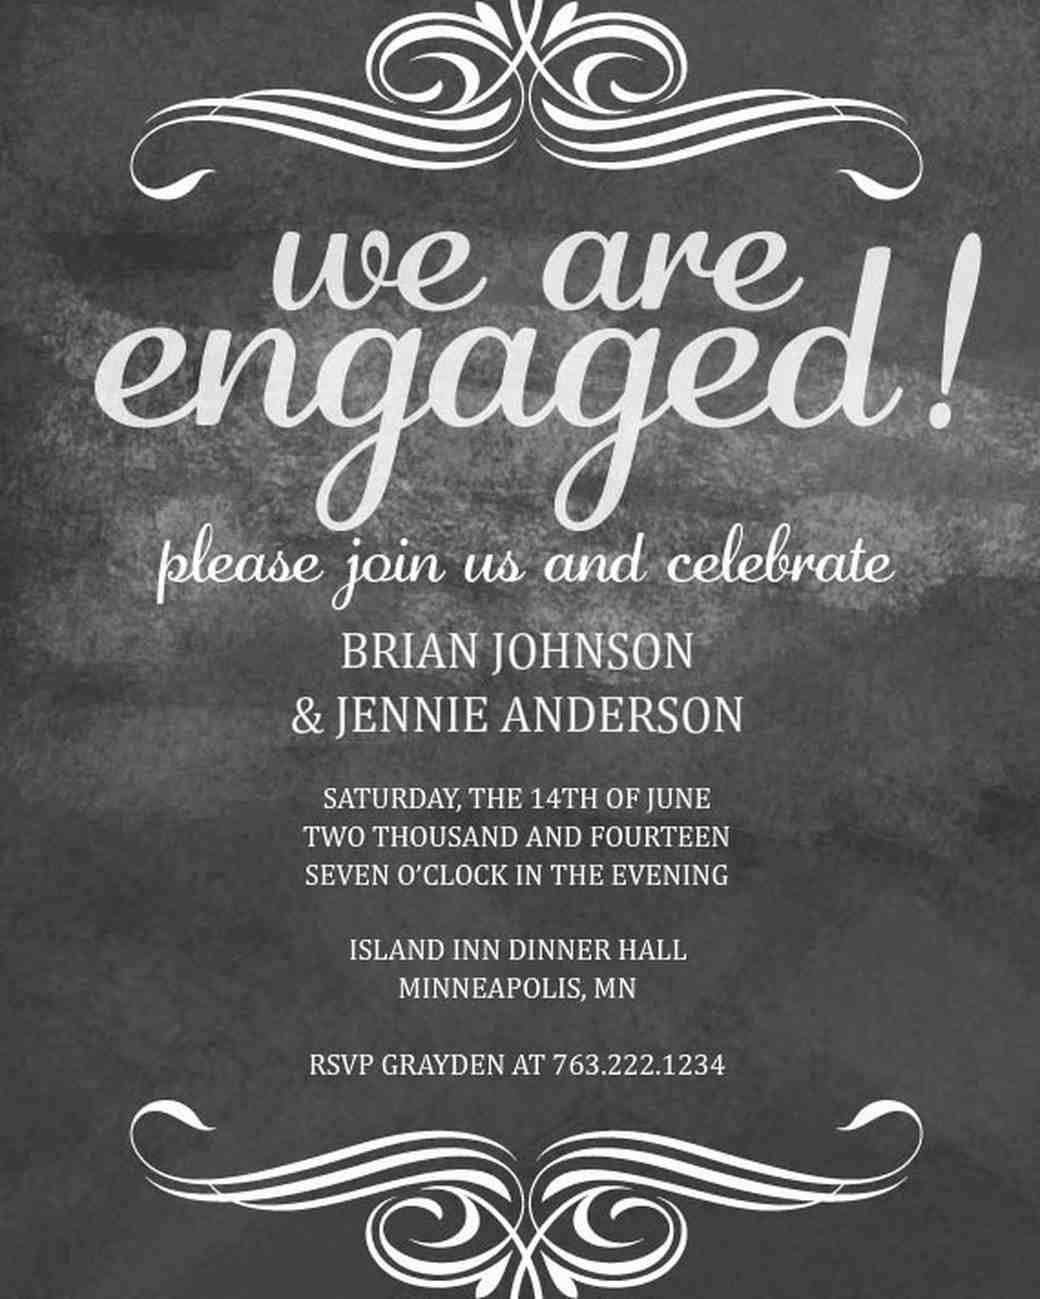 Engagement Party Invitations Ideas
 35 Paperless Engagement Party Invites